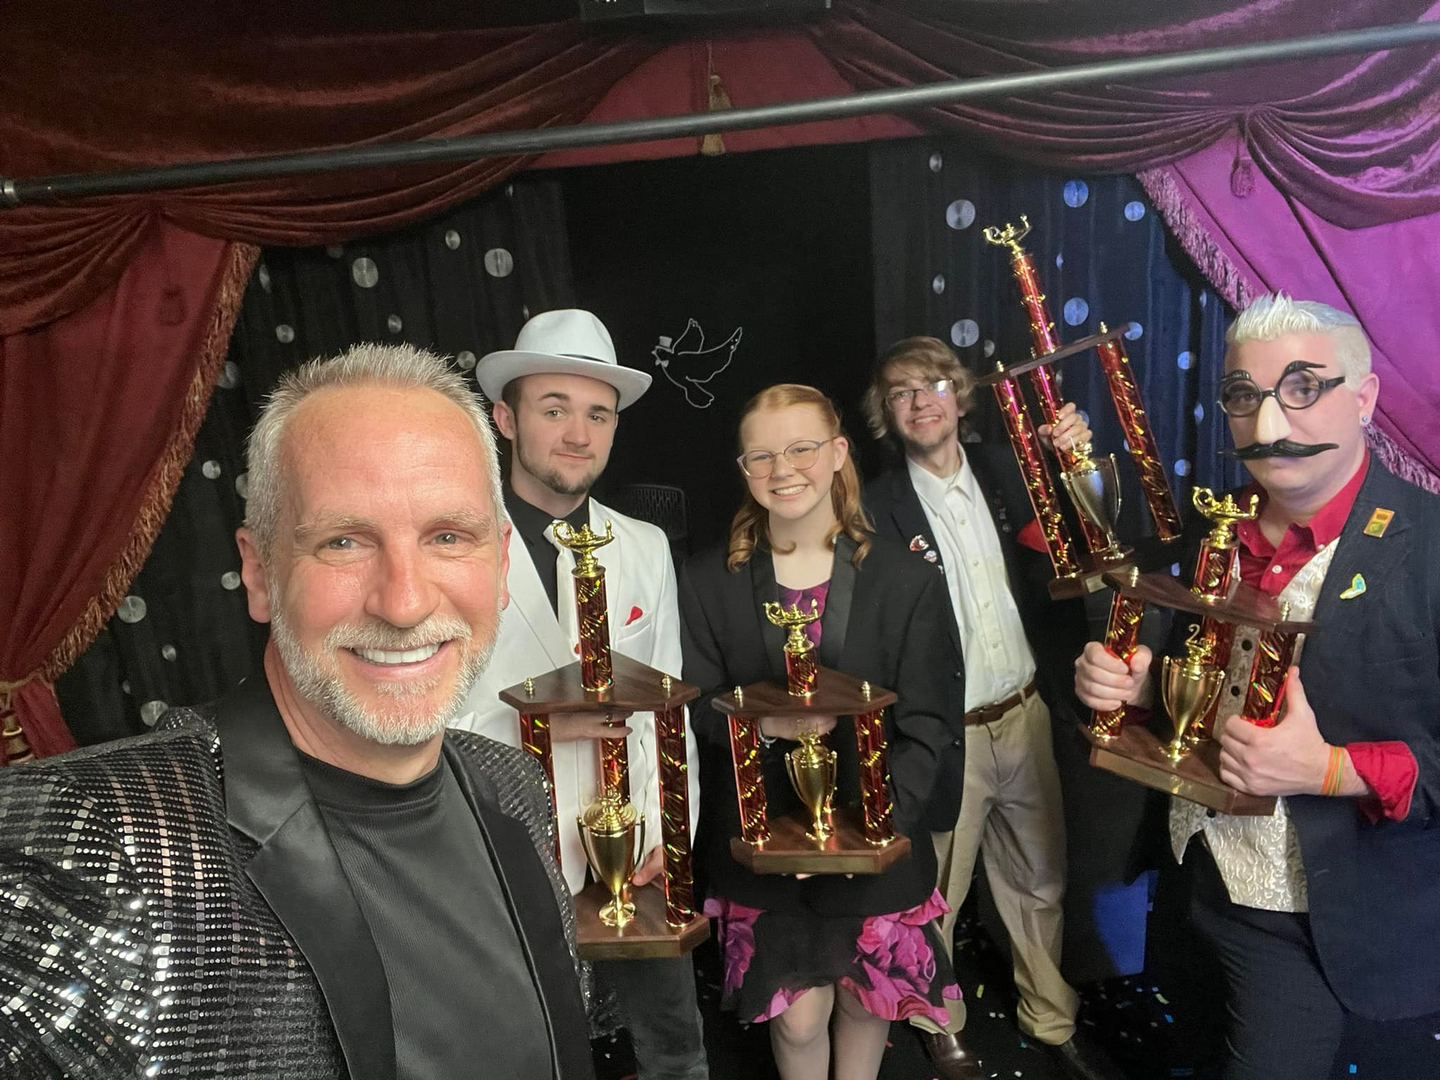 A group of people holding trophies in front of a stage.